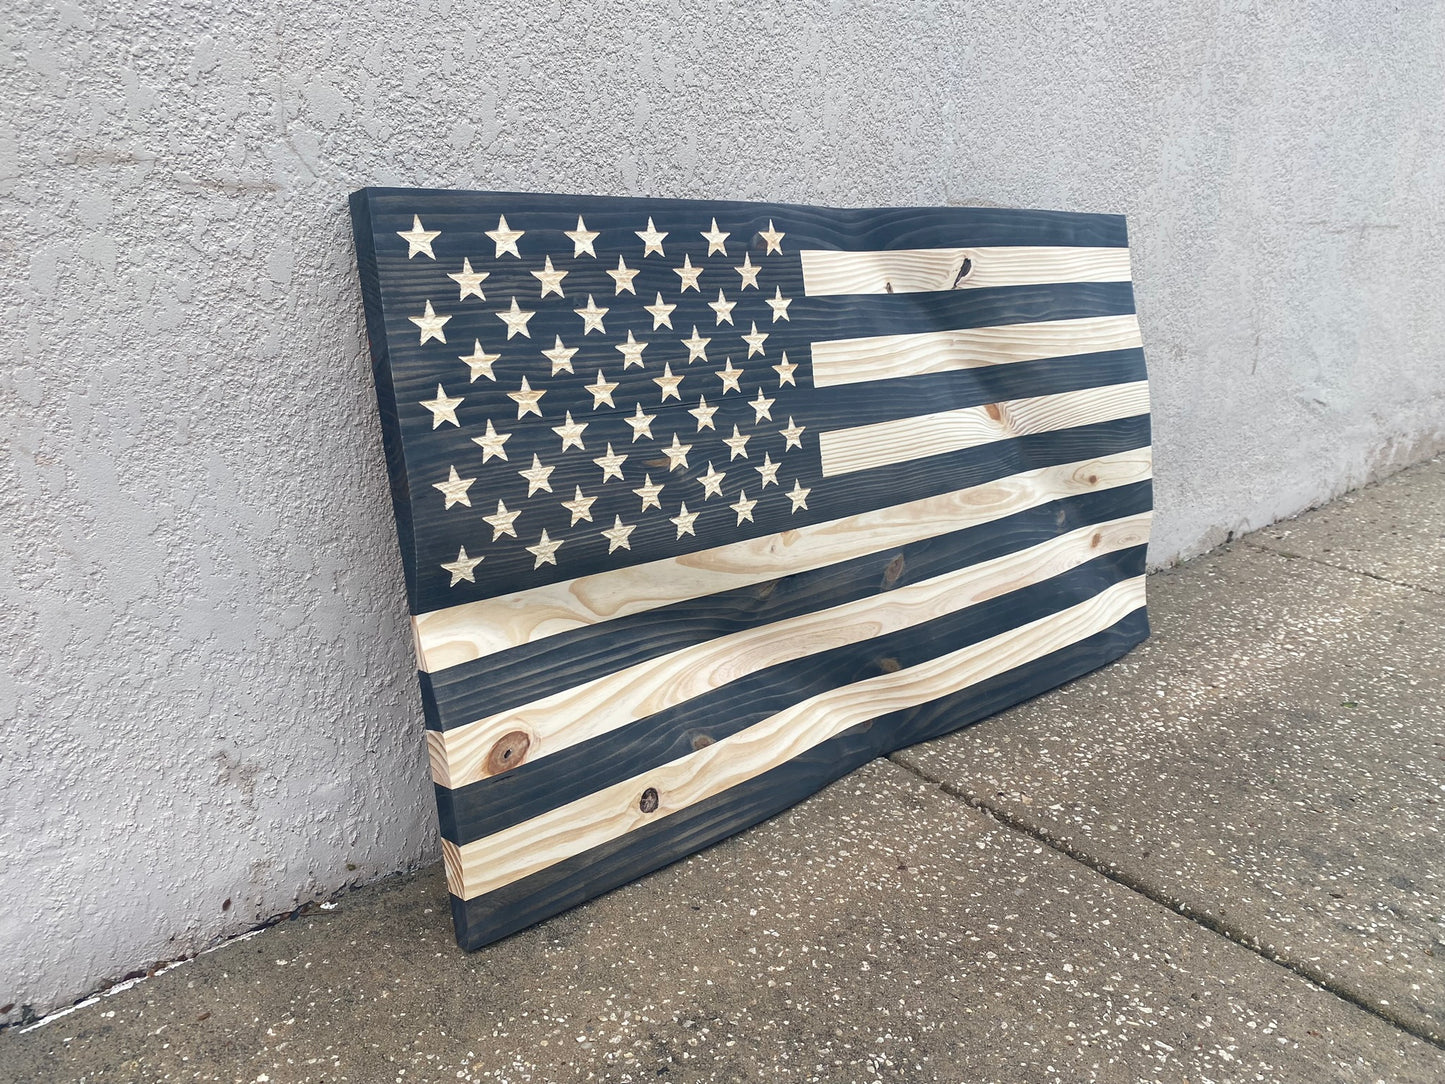 Waving Wooden Modern Rustic Blacked Out American Flag